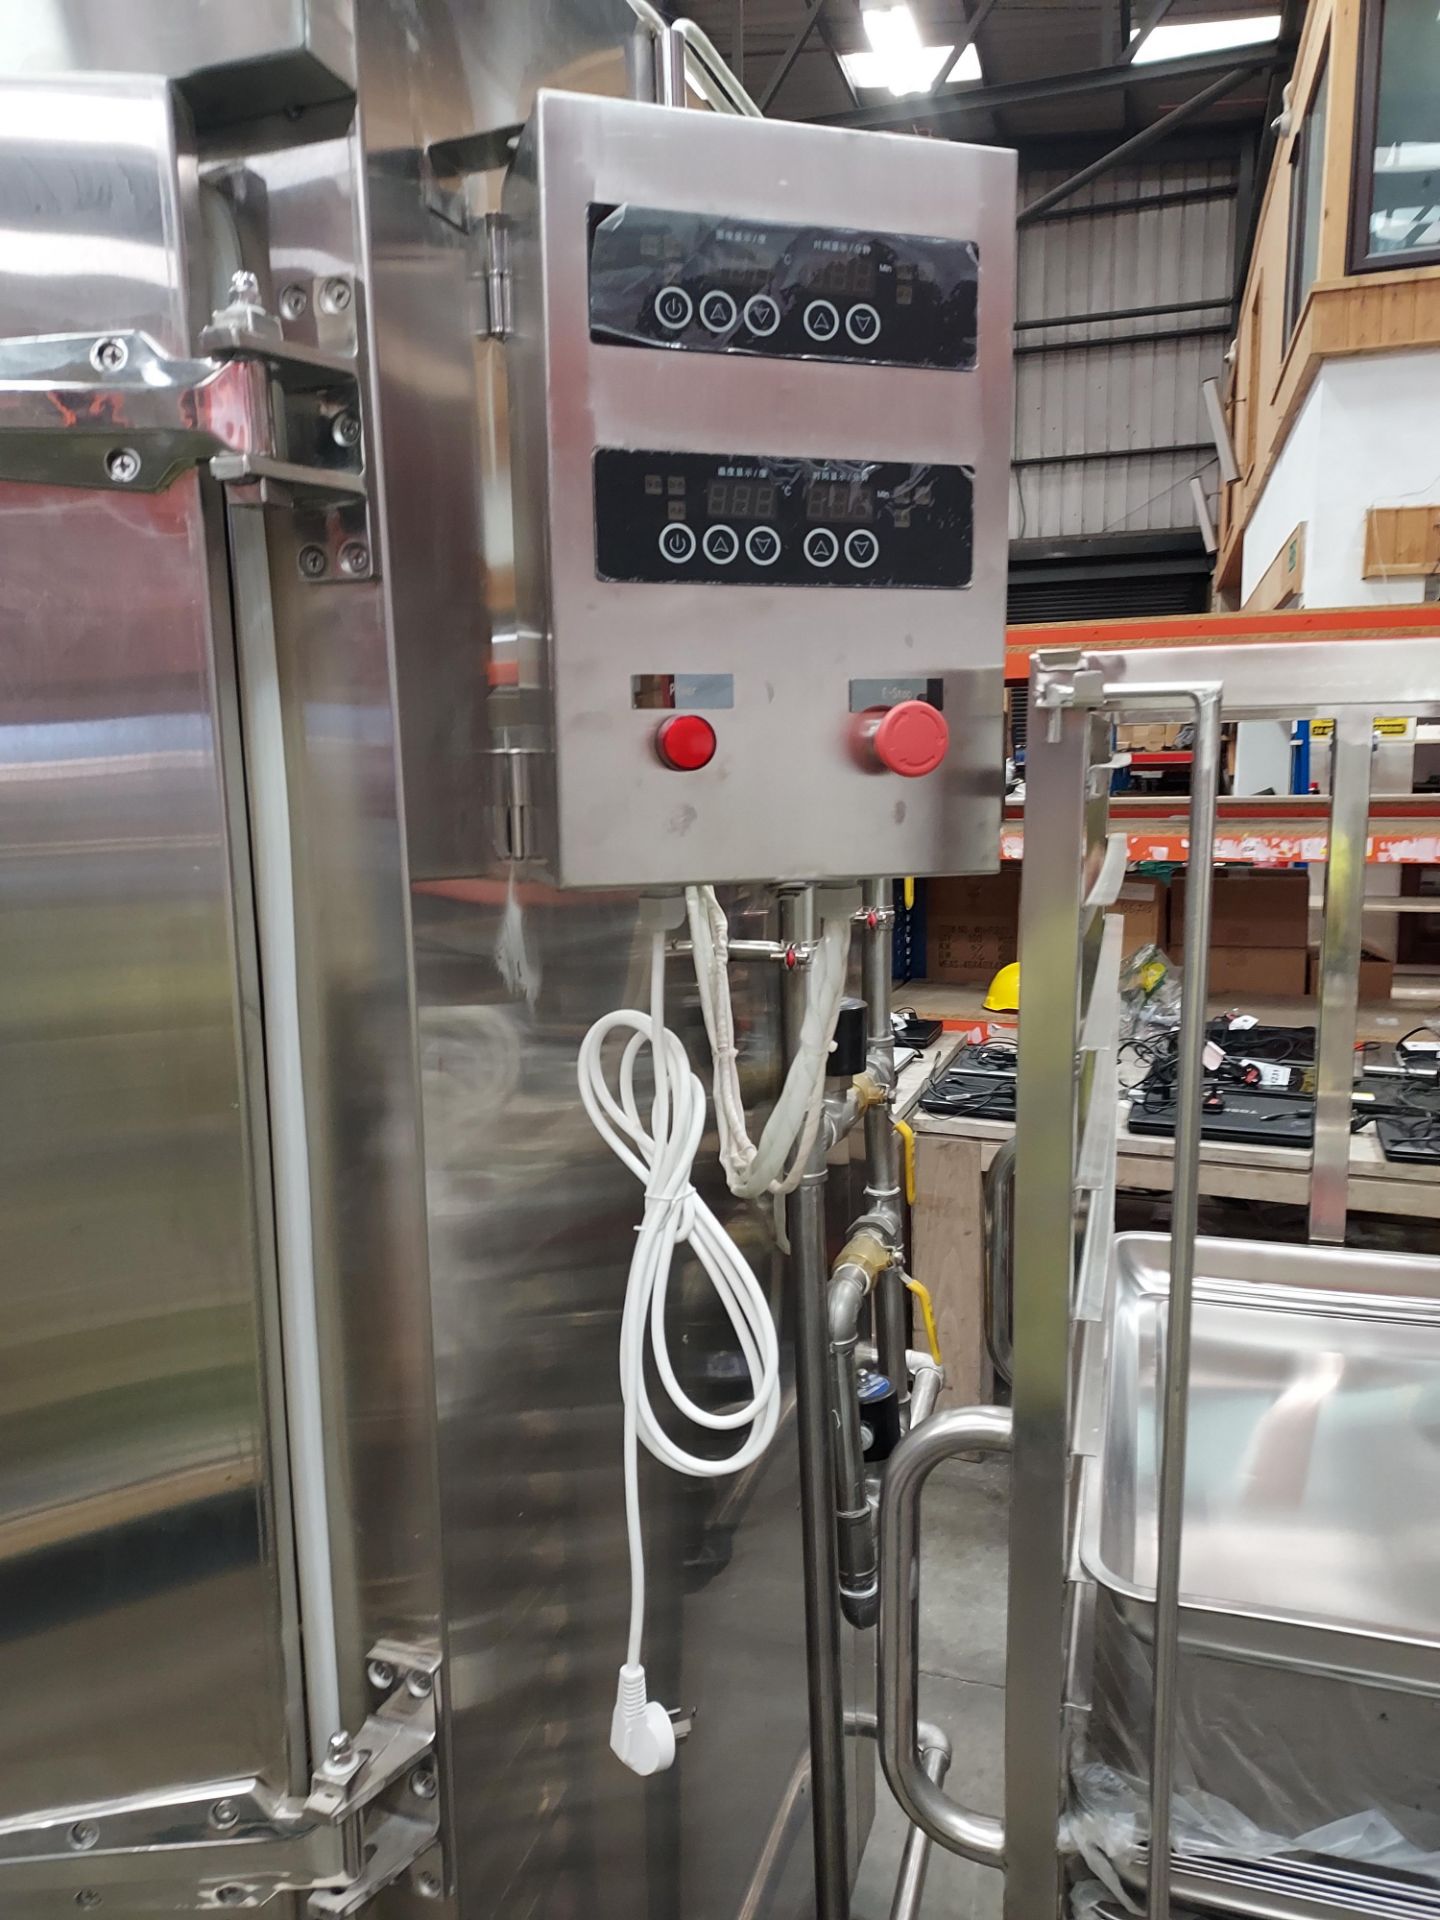 BRAND NEW STAINLESS STEEL COMMERCIAL FOOD STEAMING CABINET FOR WHOLESALE FOOD PRODUCTION BY - Image 6 of 10